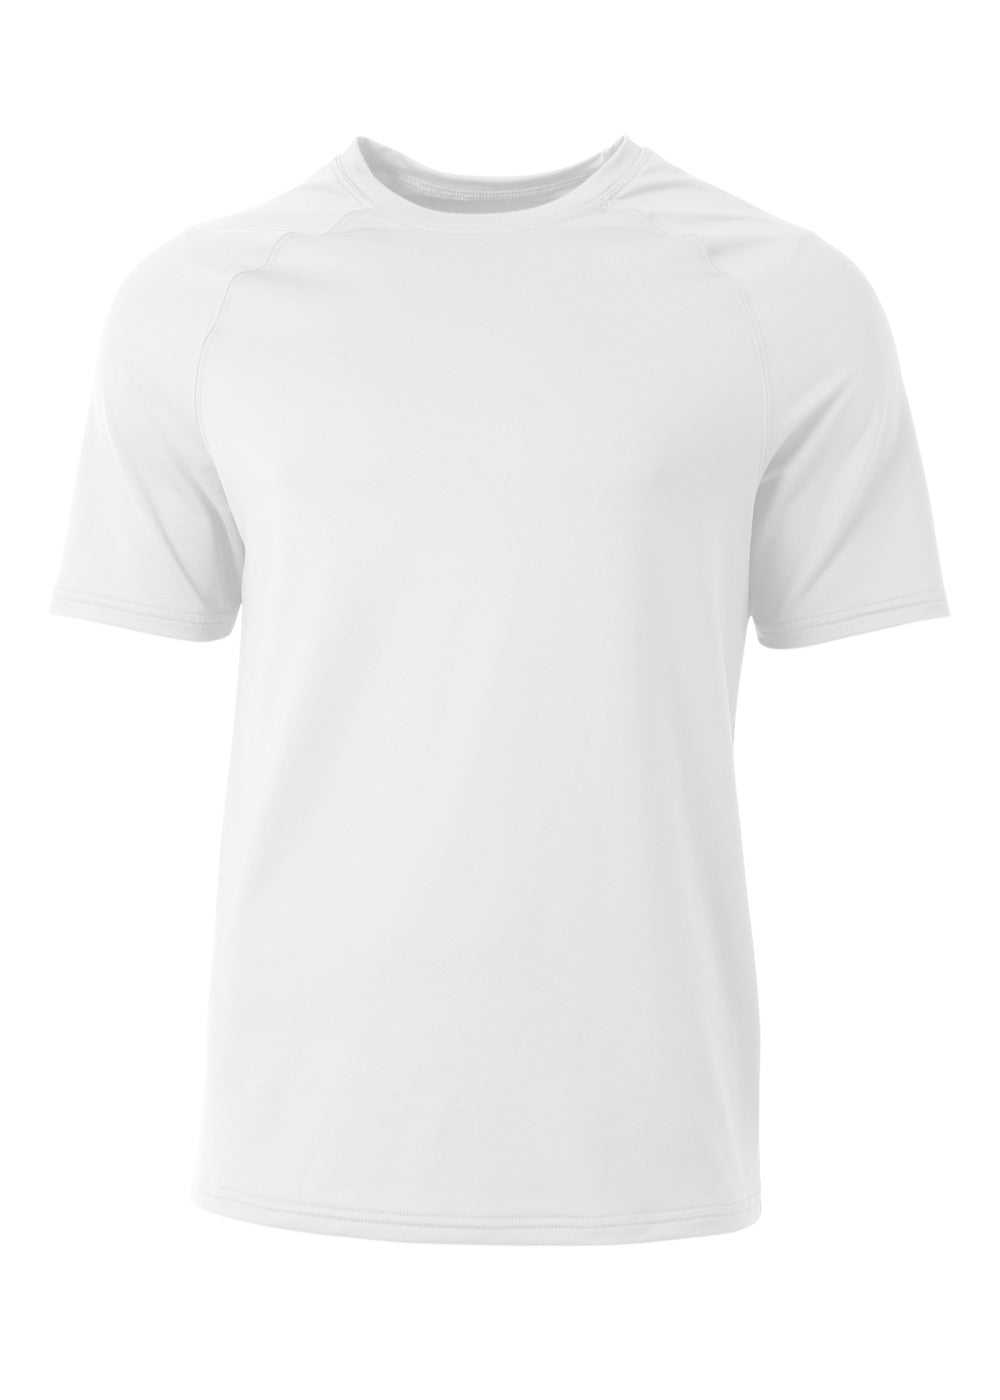 A4 N3397 Bionic Short Sleeve Tee - White - HIT a Double